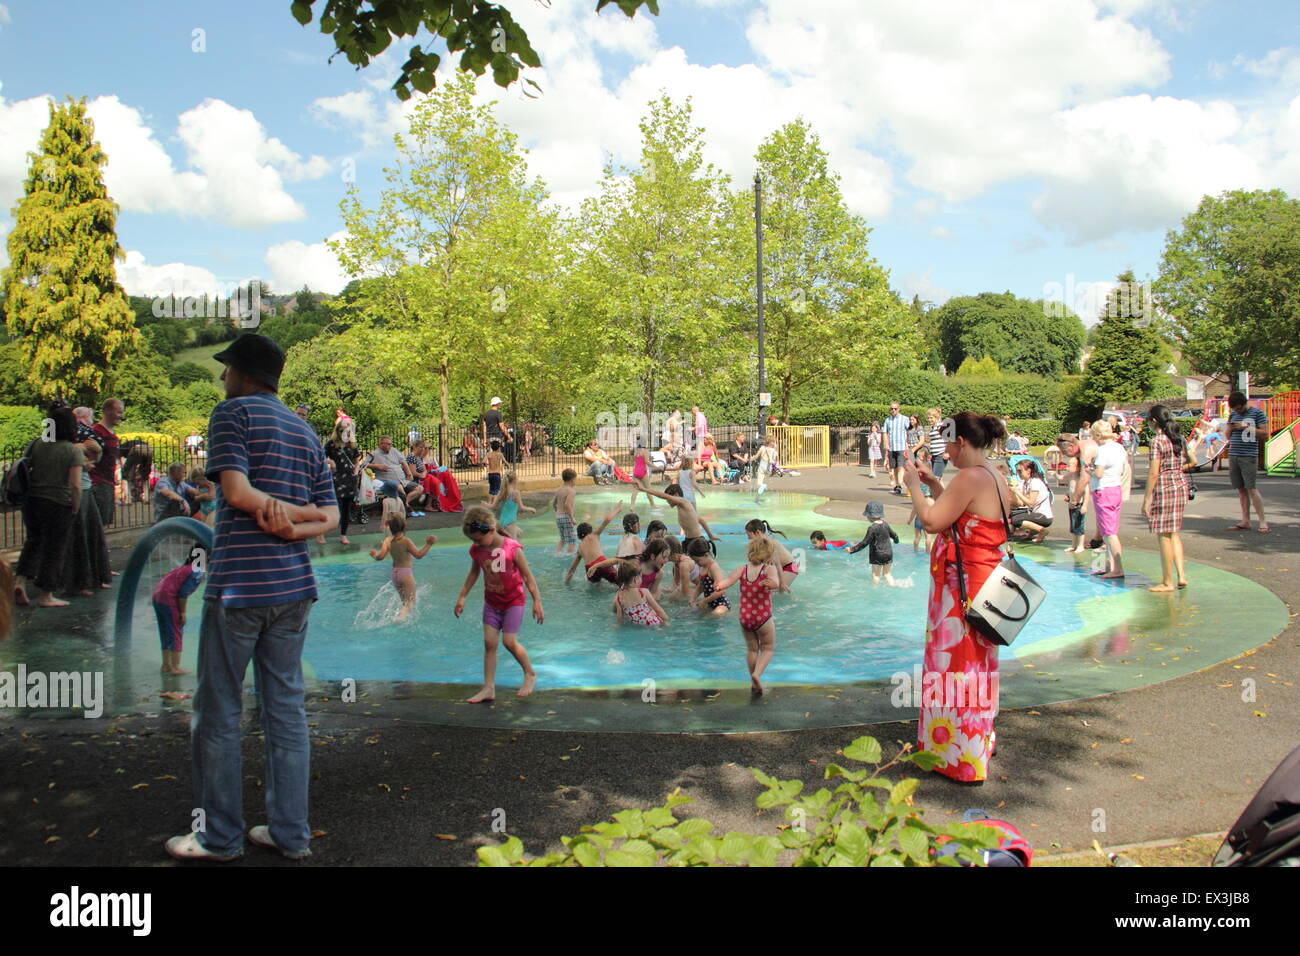 Children play in a lido during hot,sunny weather in Hal Leys Park, Matlock, Derybshire England UK - summer Stock Photo